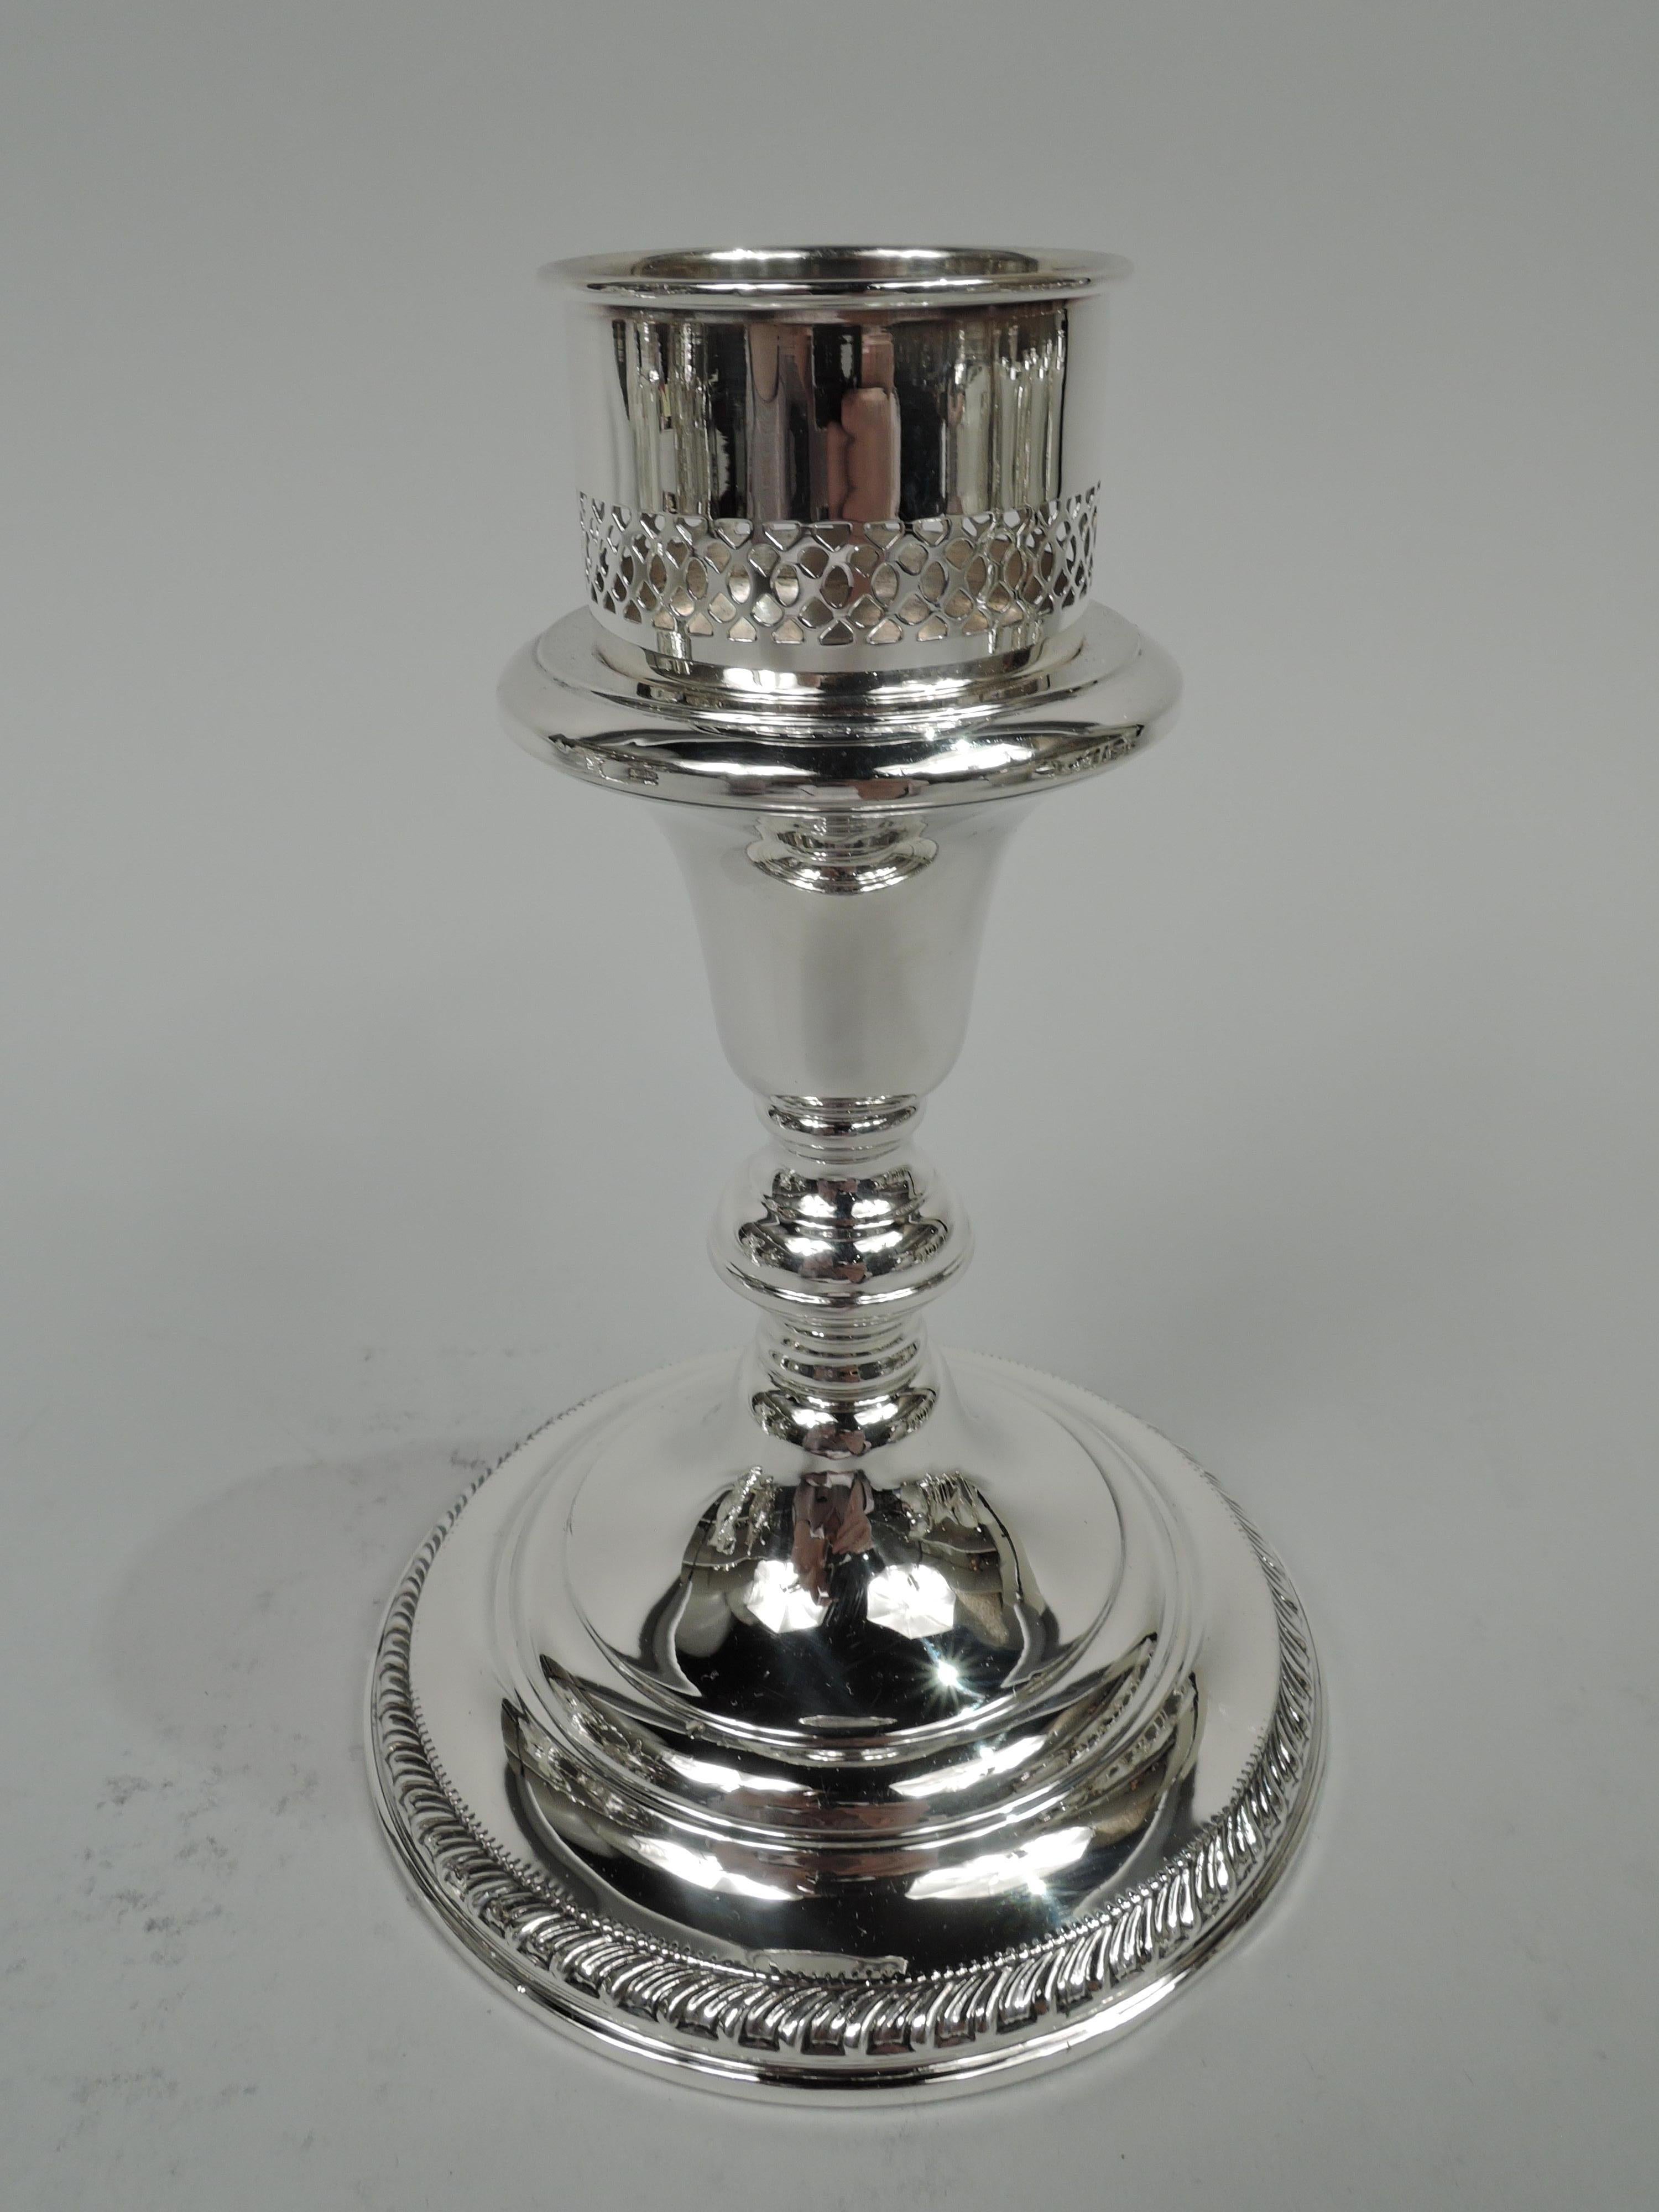 Pair of Edwardian Classical sterling silver candlesticks. Made by Redlich in New York. Each: Tapering socket mounted with pierced, inset, and straight sides; knop on domed foot. Beading and gadrooning. Fully marked including maker’s and retailer’s